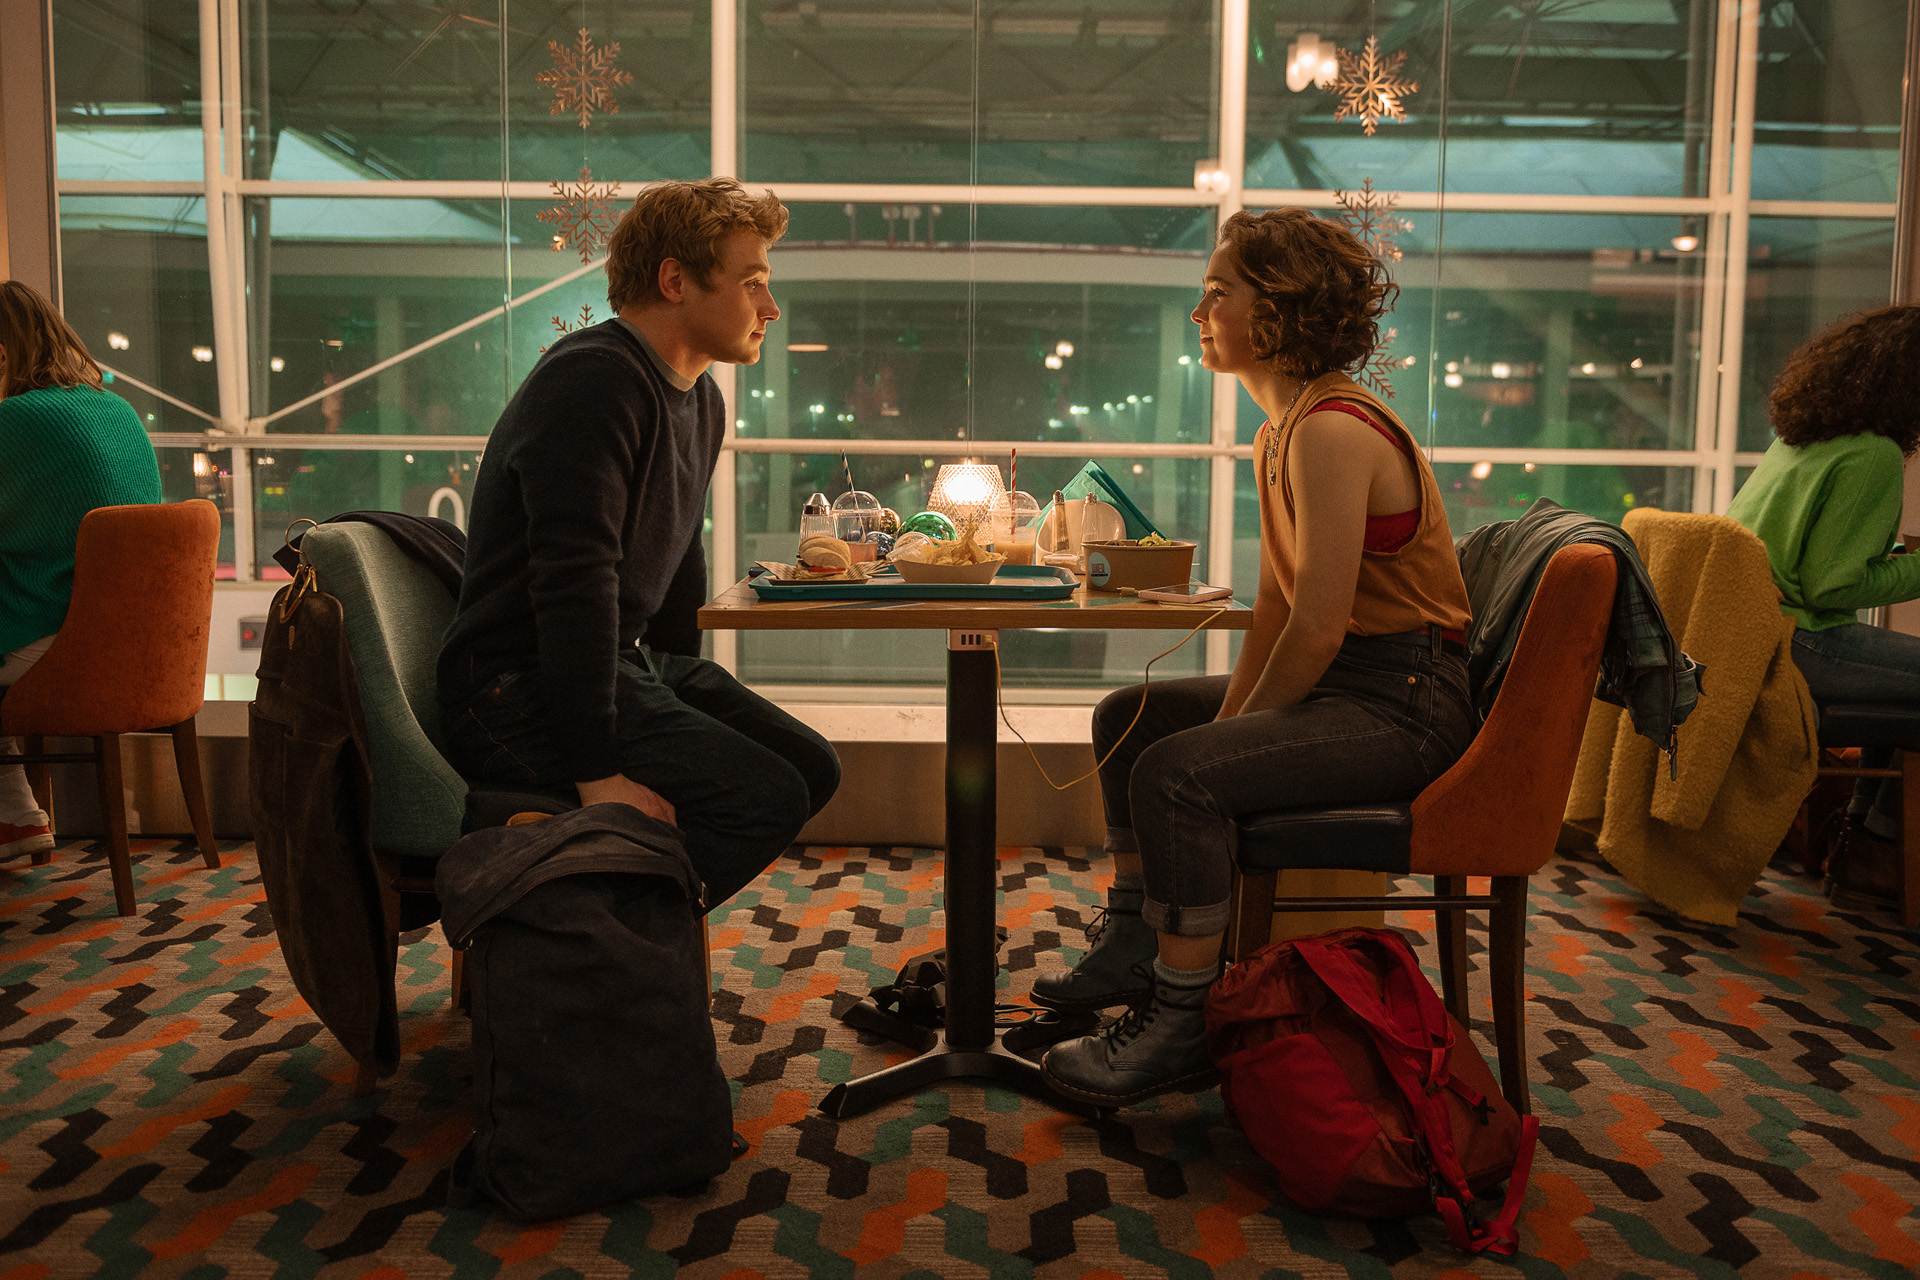 Haley Lu Richardson as Hadley Sullivan and Ben Hardy as Oliver Jones in Love at First Sight on Netflix